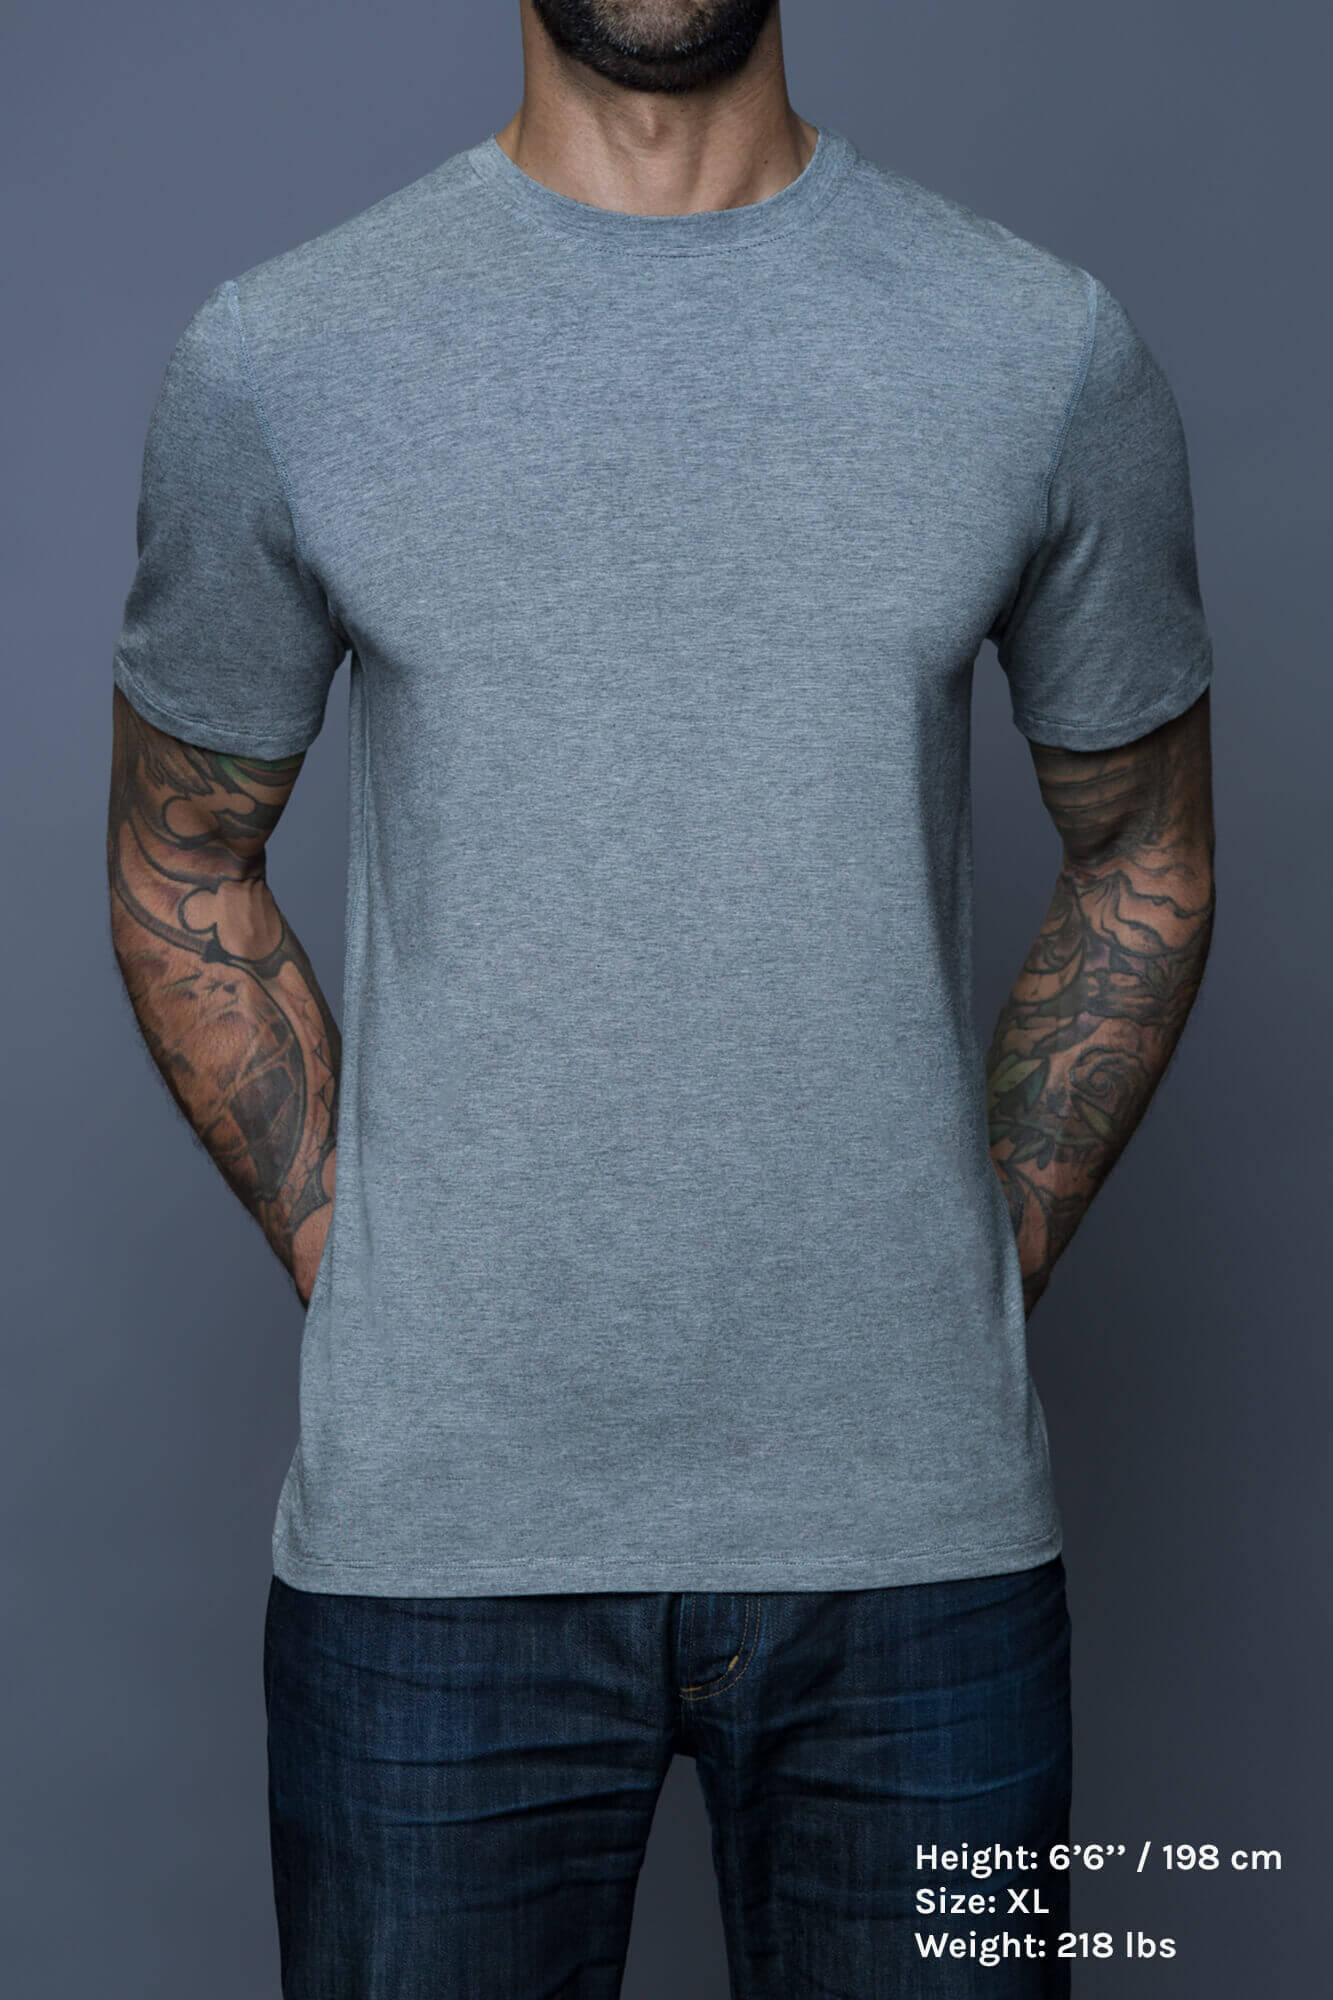 Navas Lab Crowe microstripe tall tee in light grey. Long T-shirt for tall guys for everyday use.